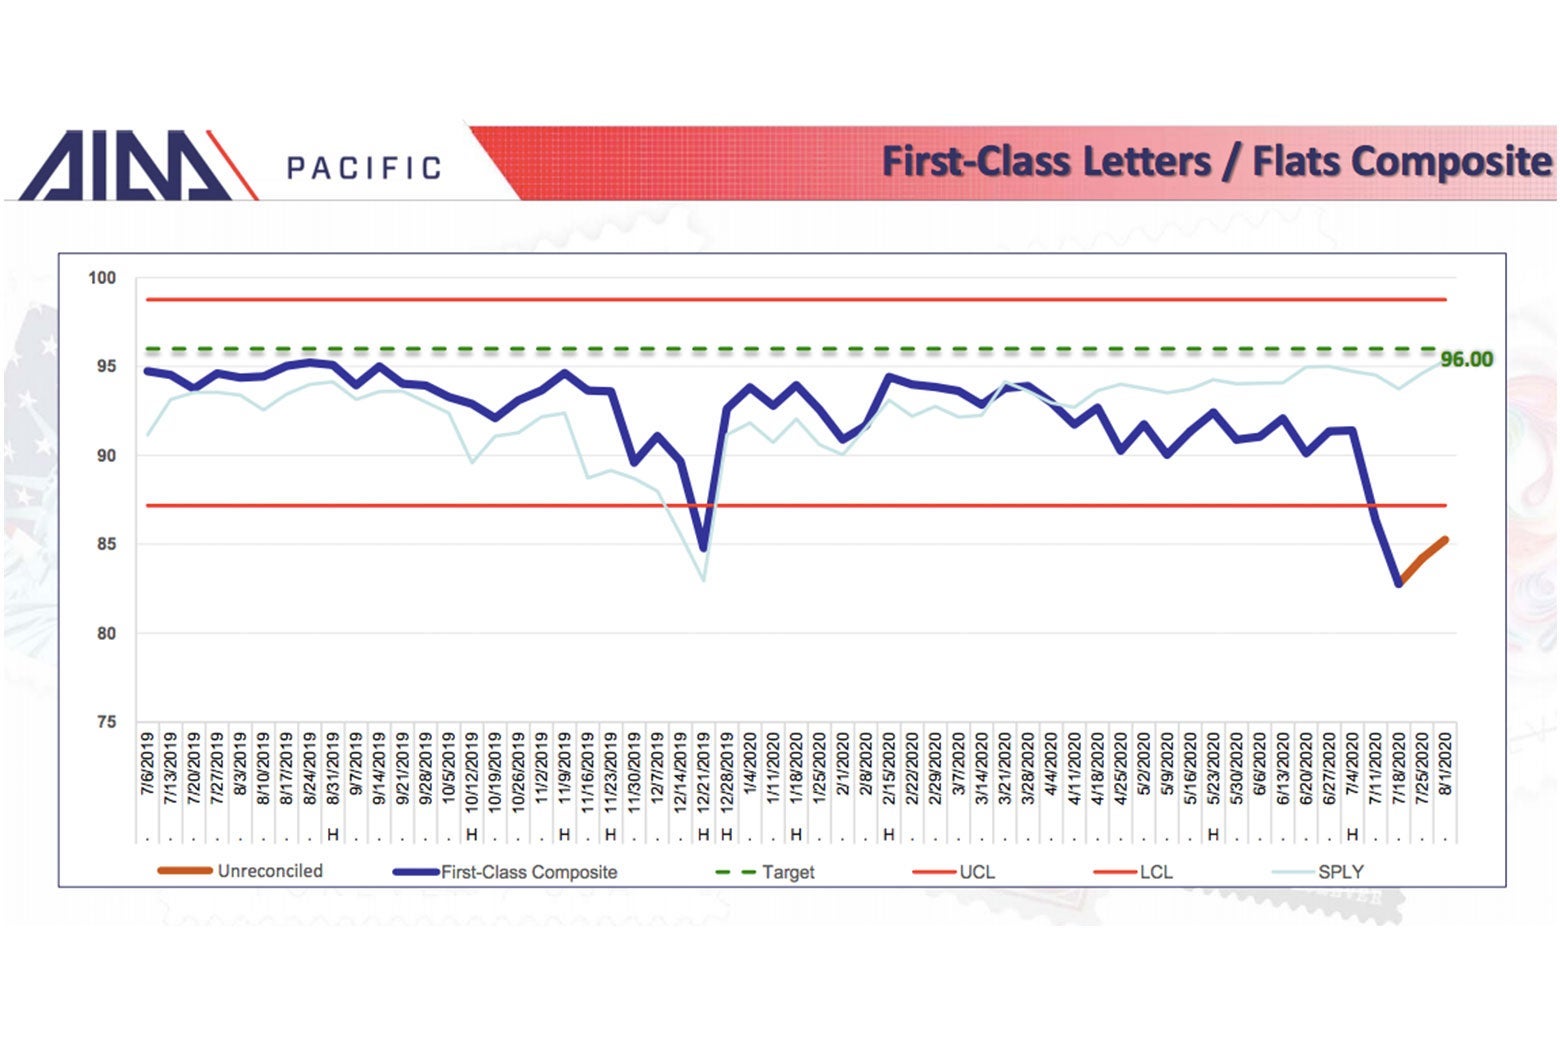 Declines in first-class mail delivery in the Pacific region of the U.S.